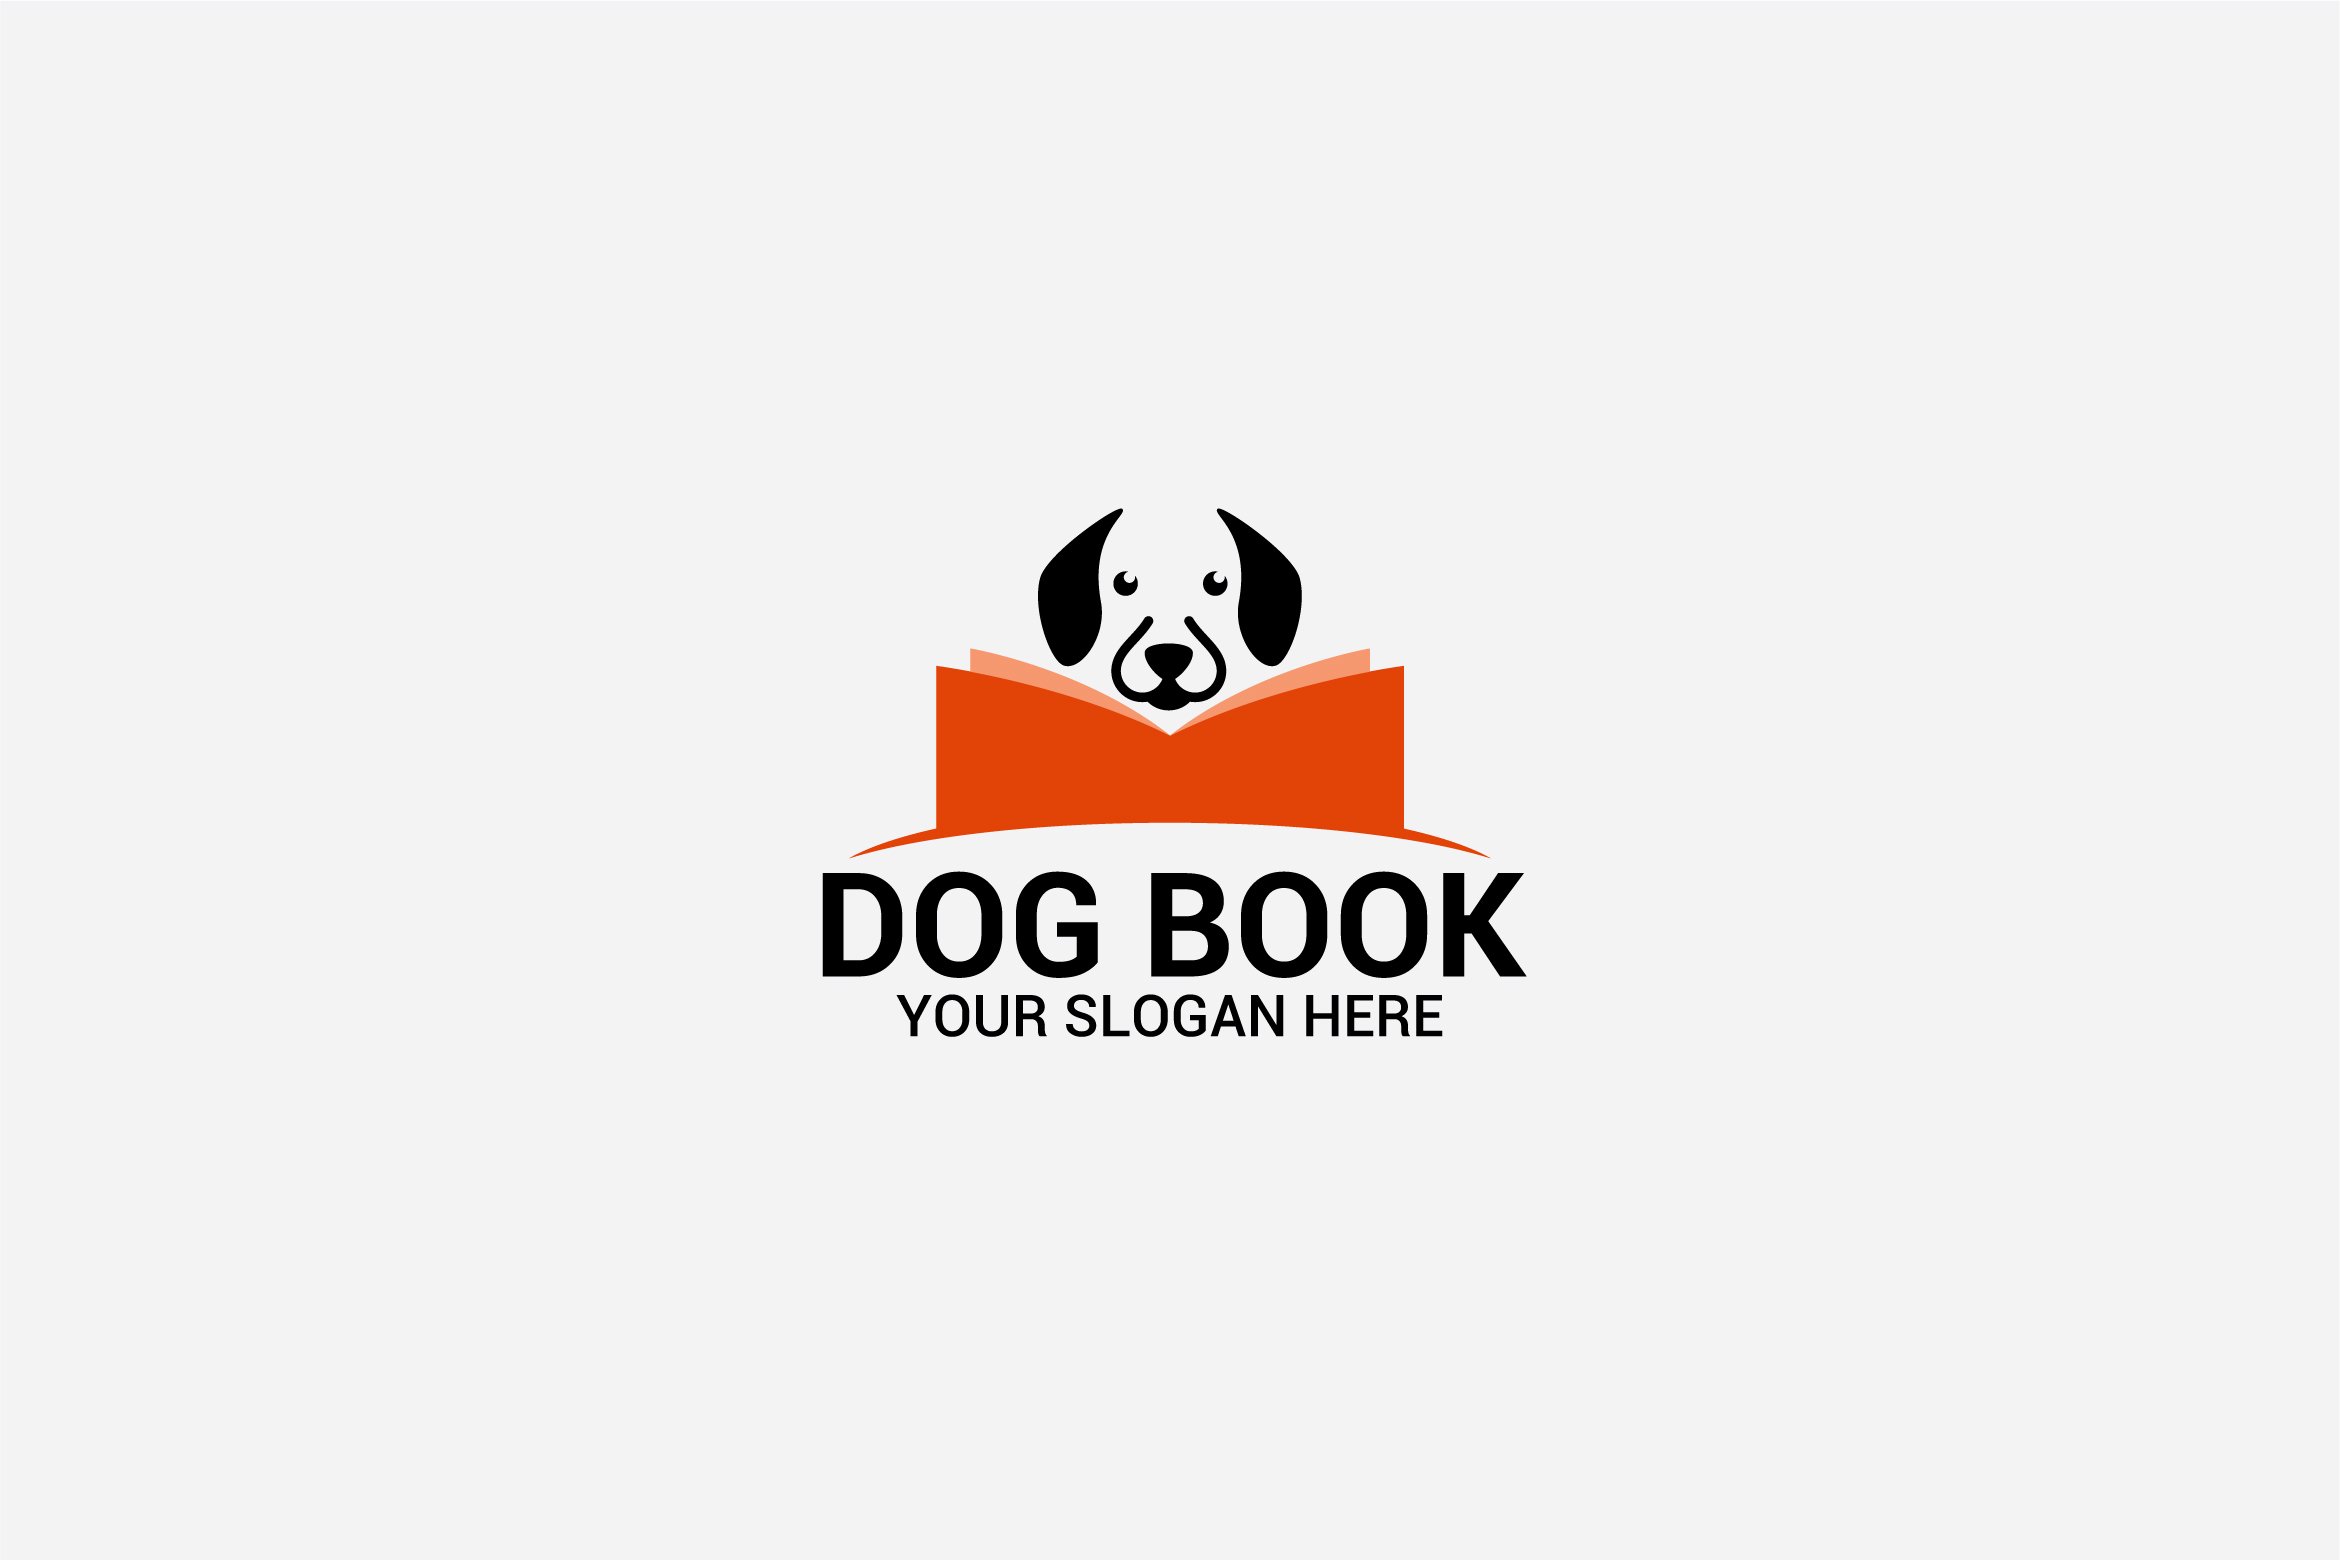 Funny dog with an orange book for logo.